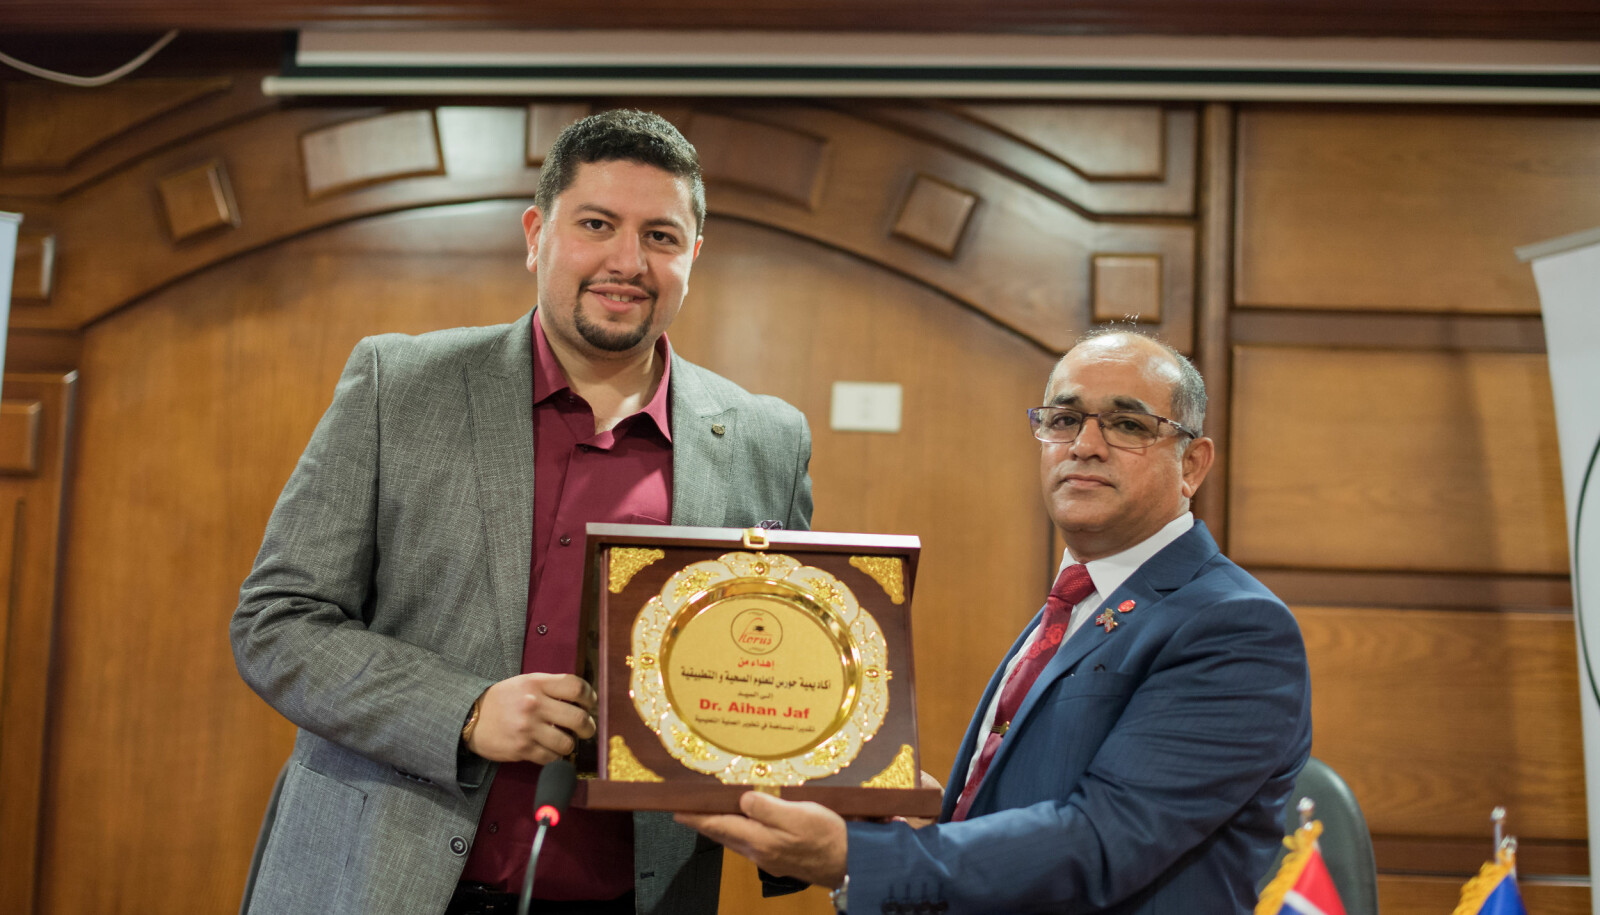 "Dr. Aihan Jaf" is written on the award Jaf receives back from the head of Horus Academy in Egypt.